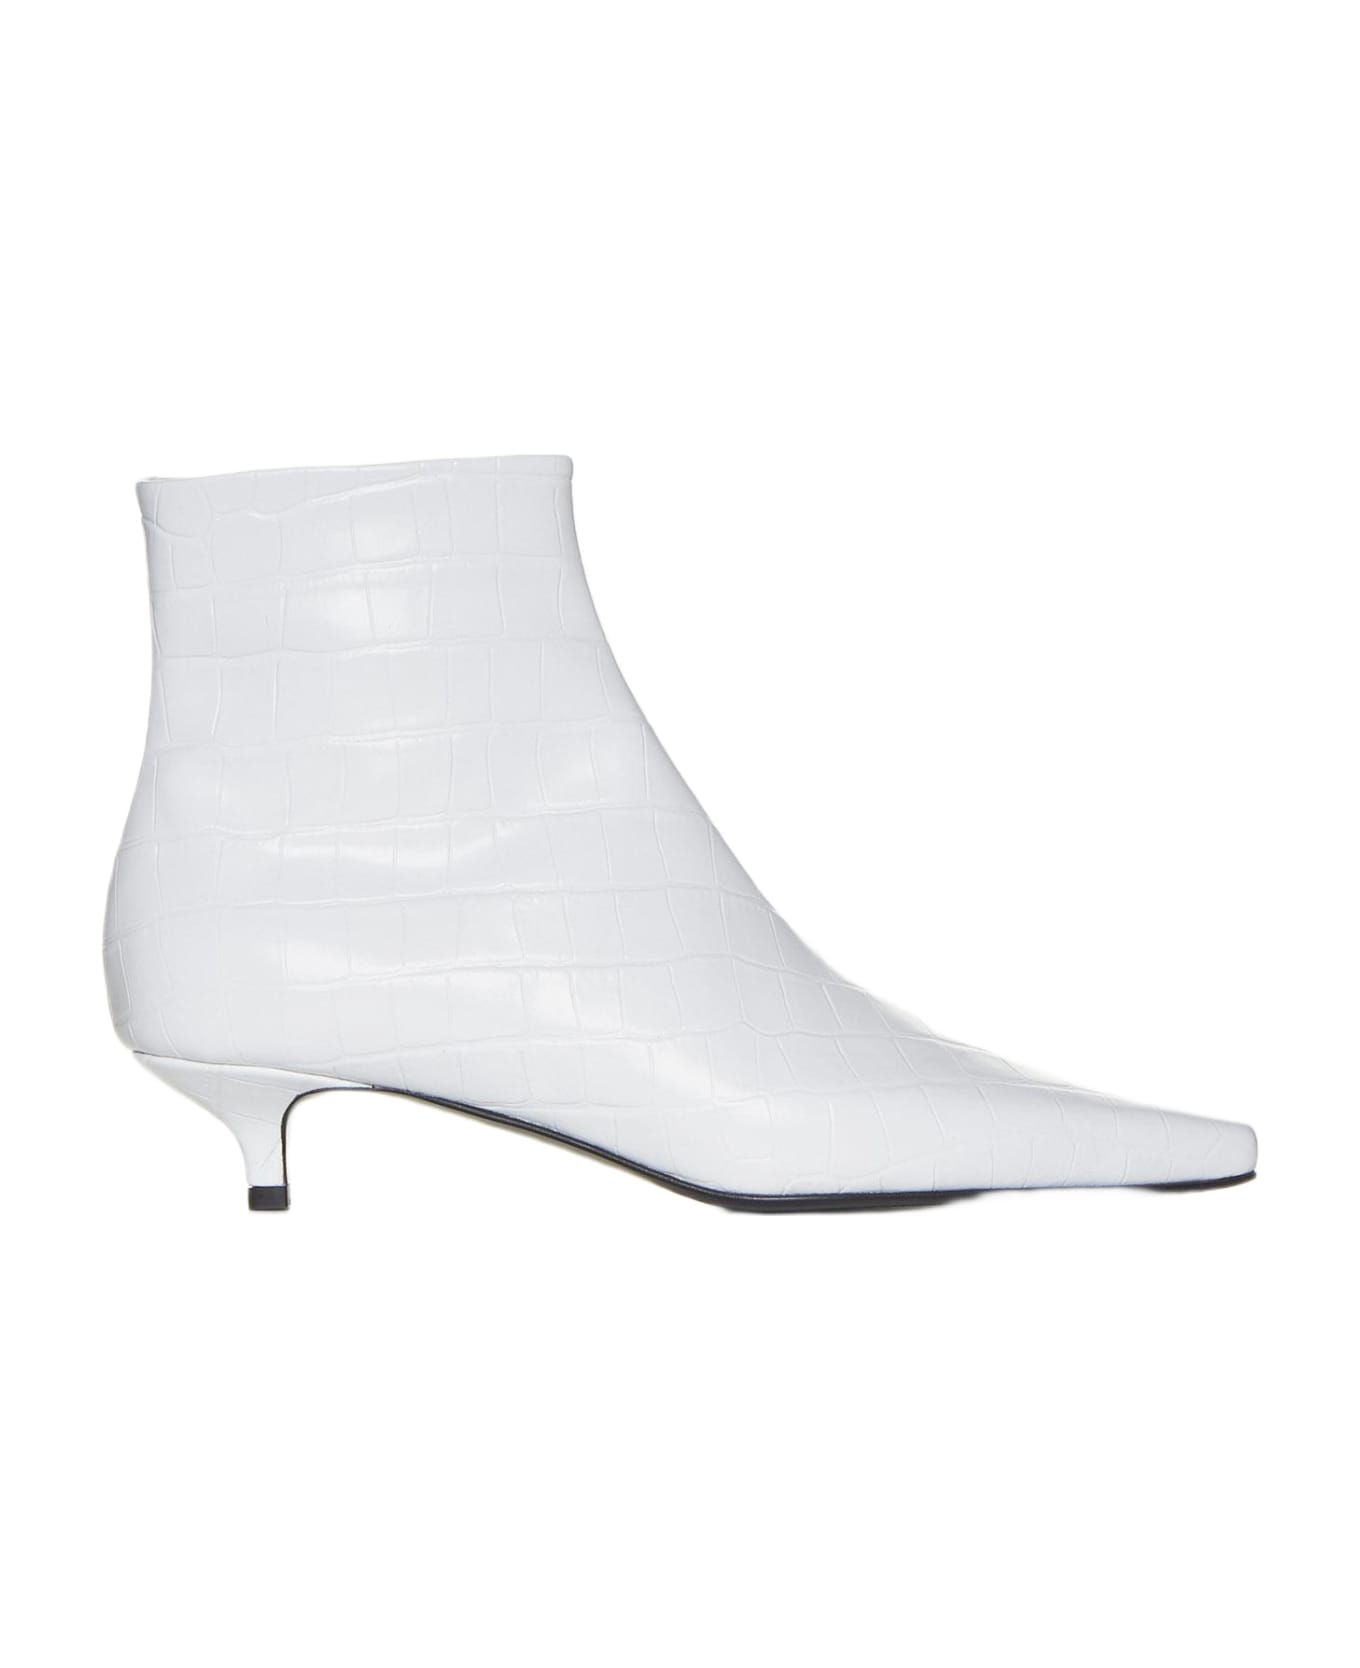 Totême The Croco Slim Leather Ankle Boots - WHITE ブーツ